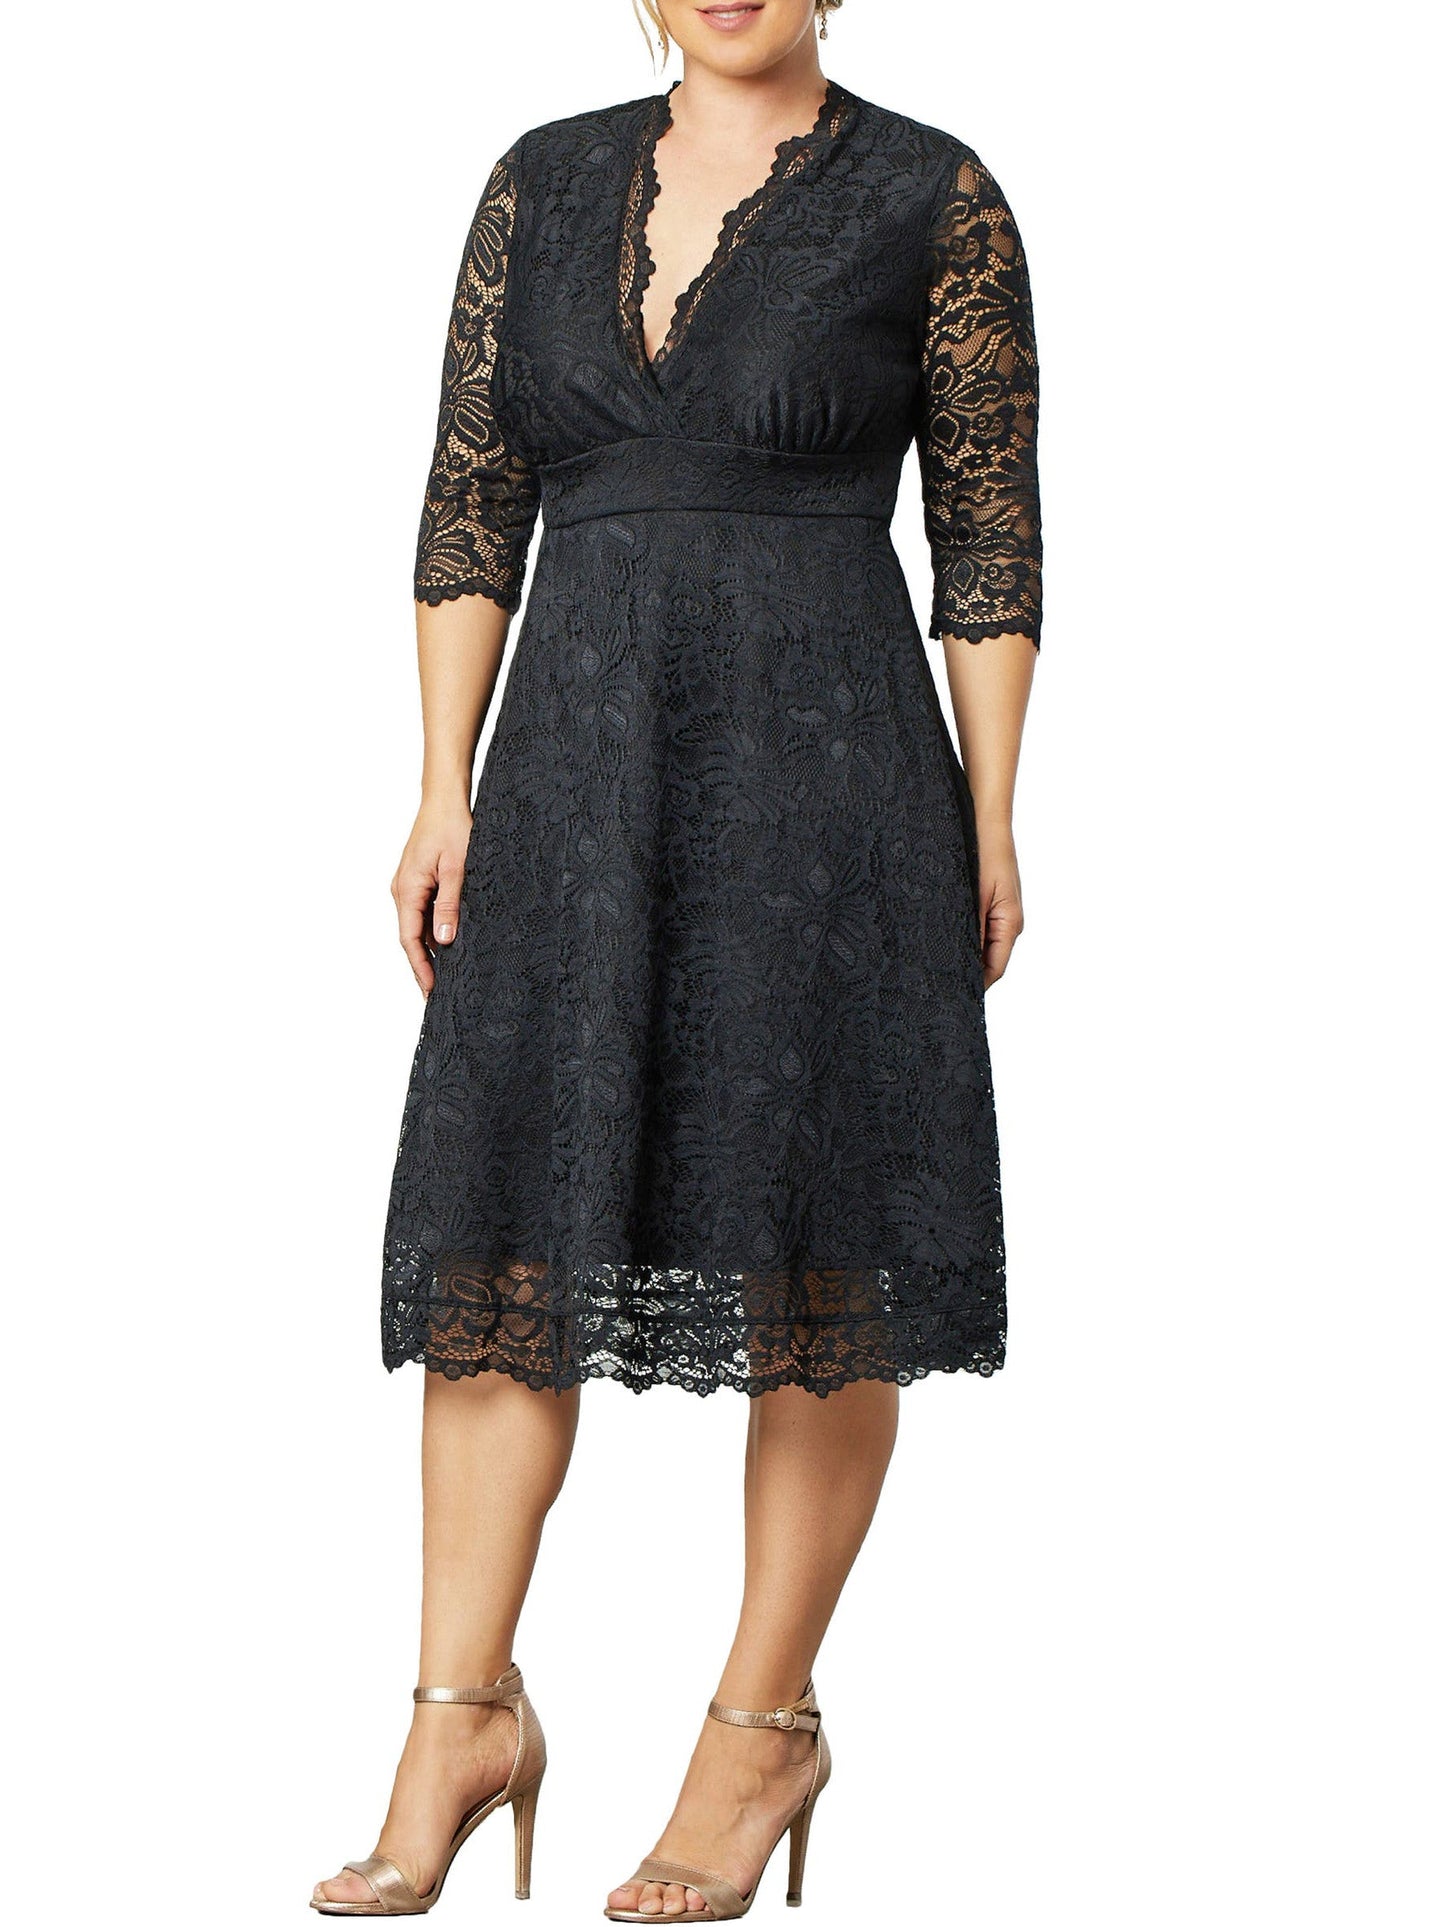 Lace A-Line Dipped 3/4 Sleeves Dress-GD102215